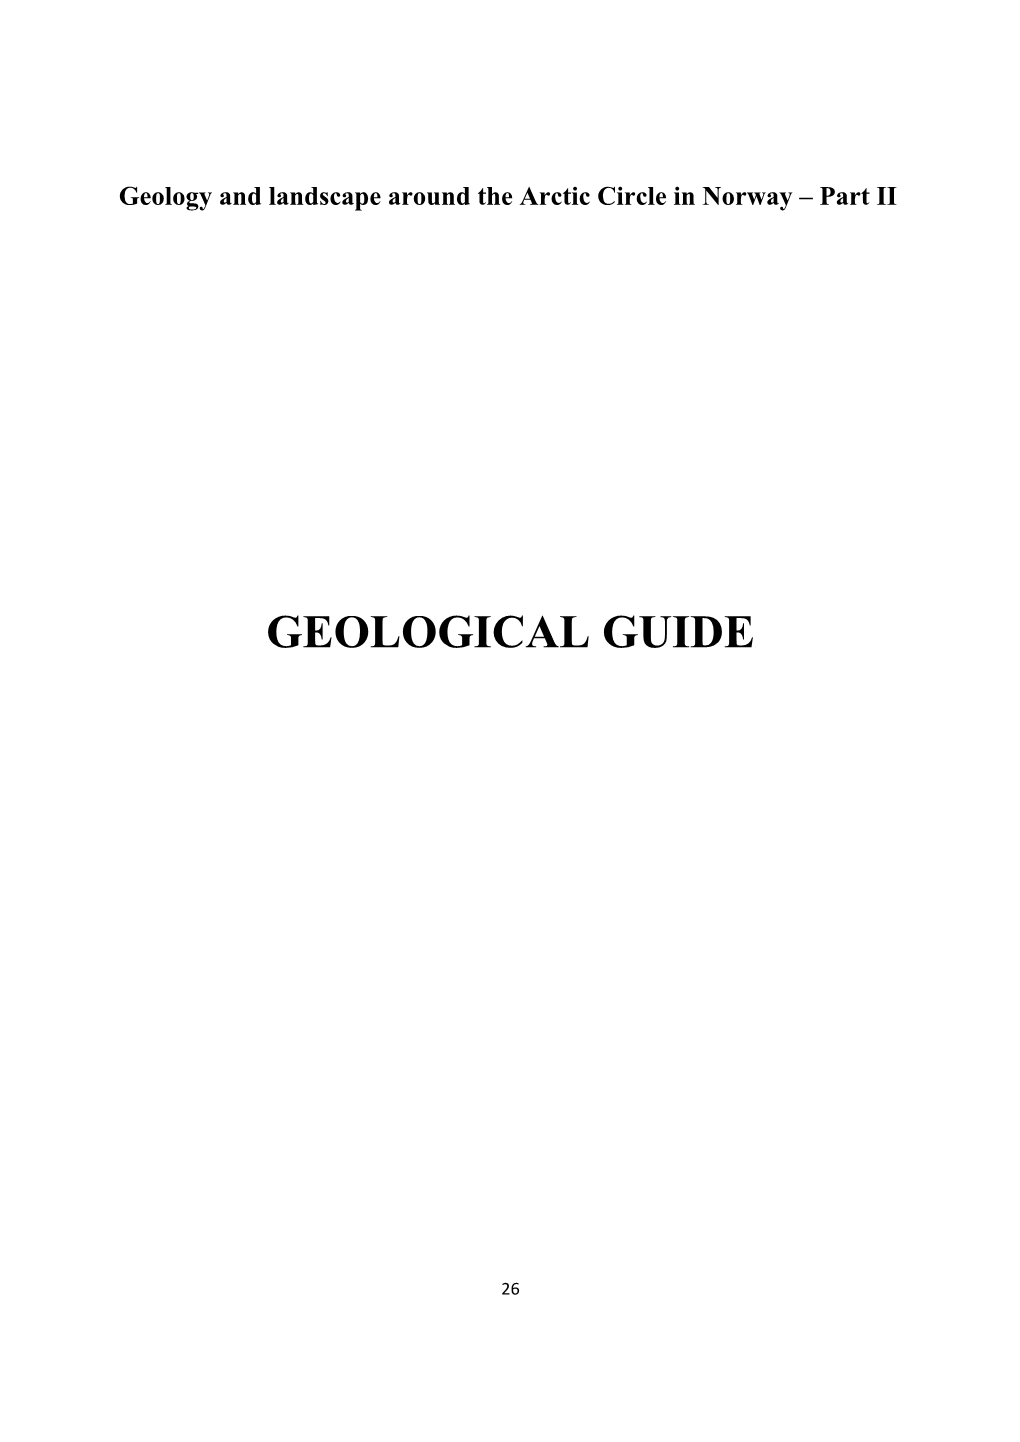 Geological Guide